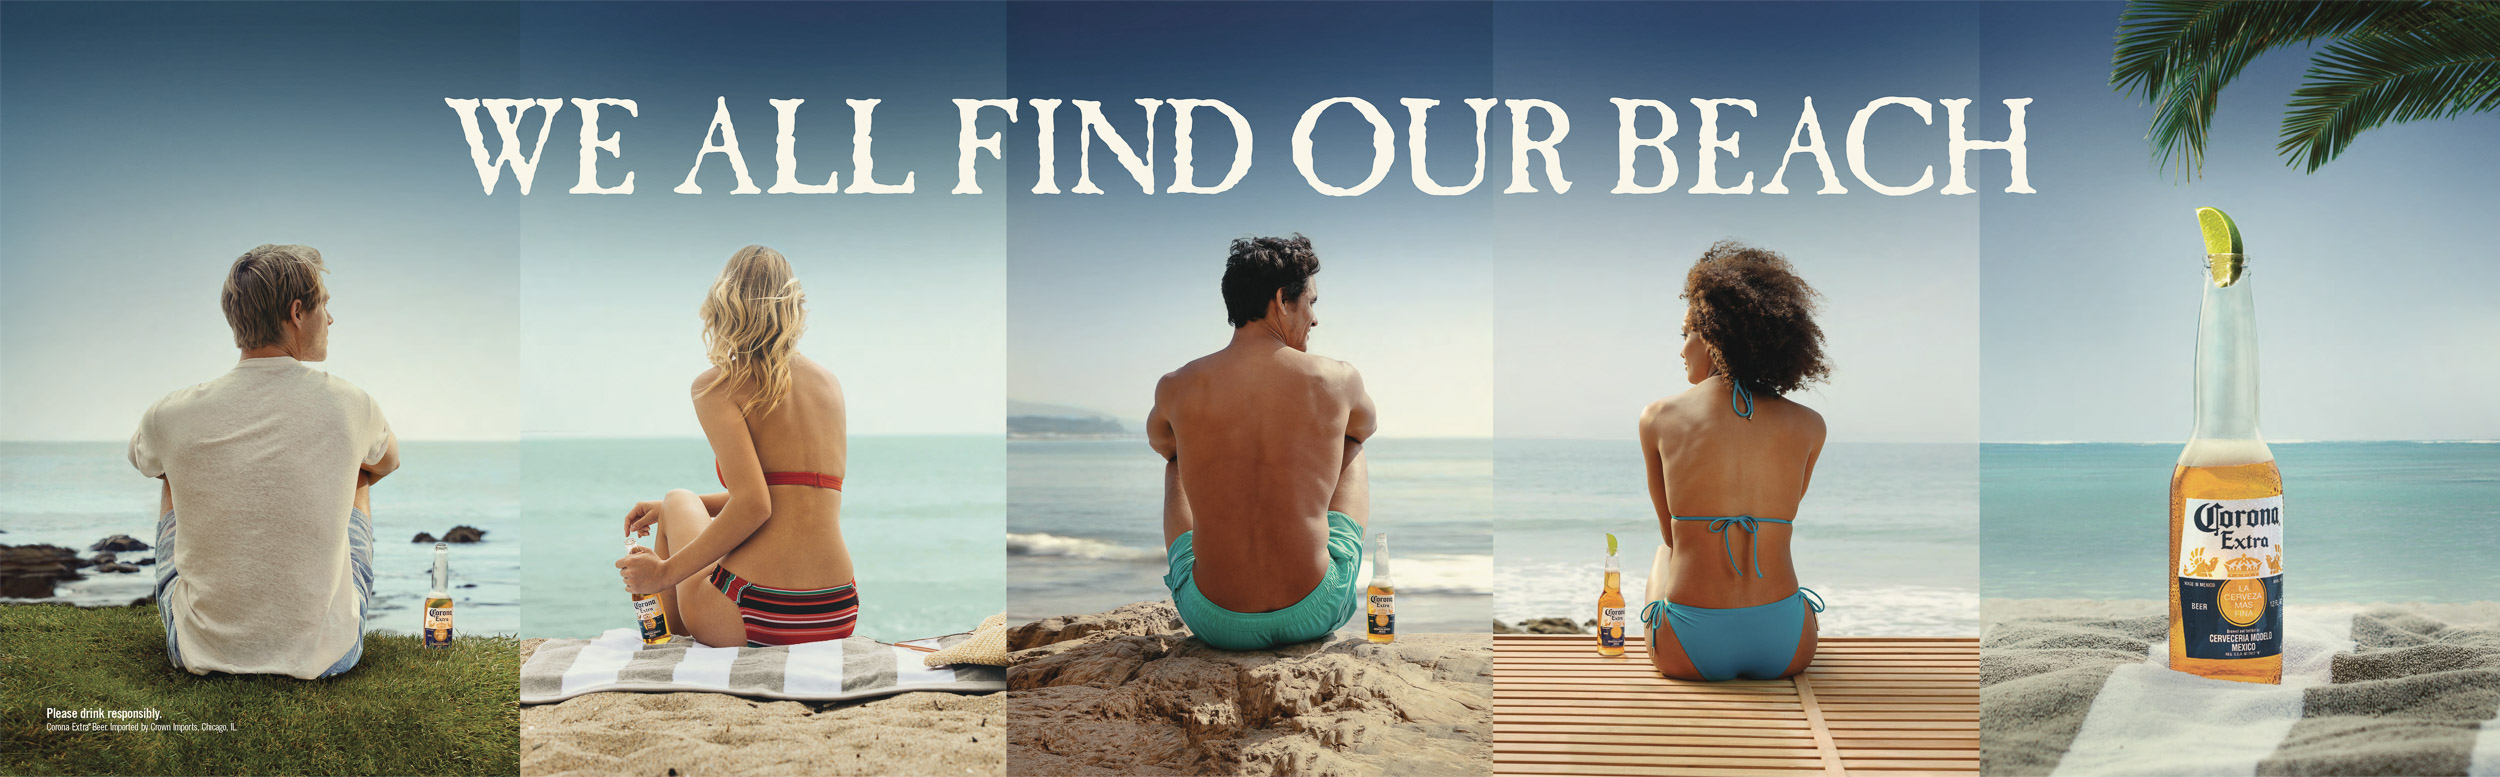 Advertising campaign for Corona with Cramer-Krasselt 